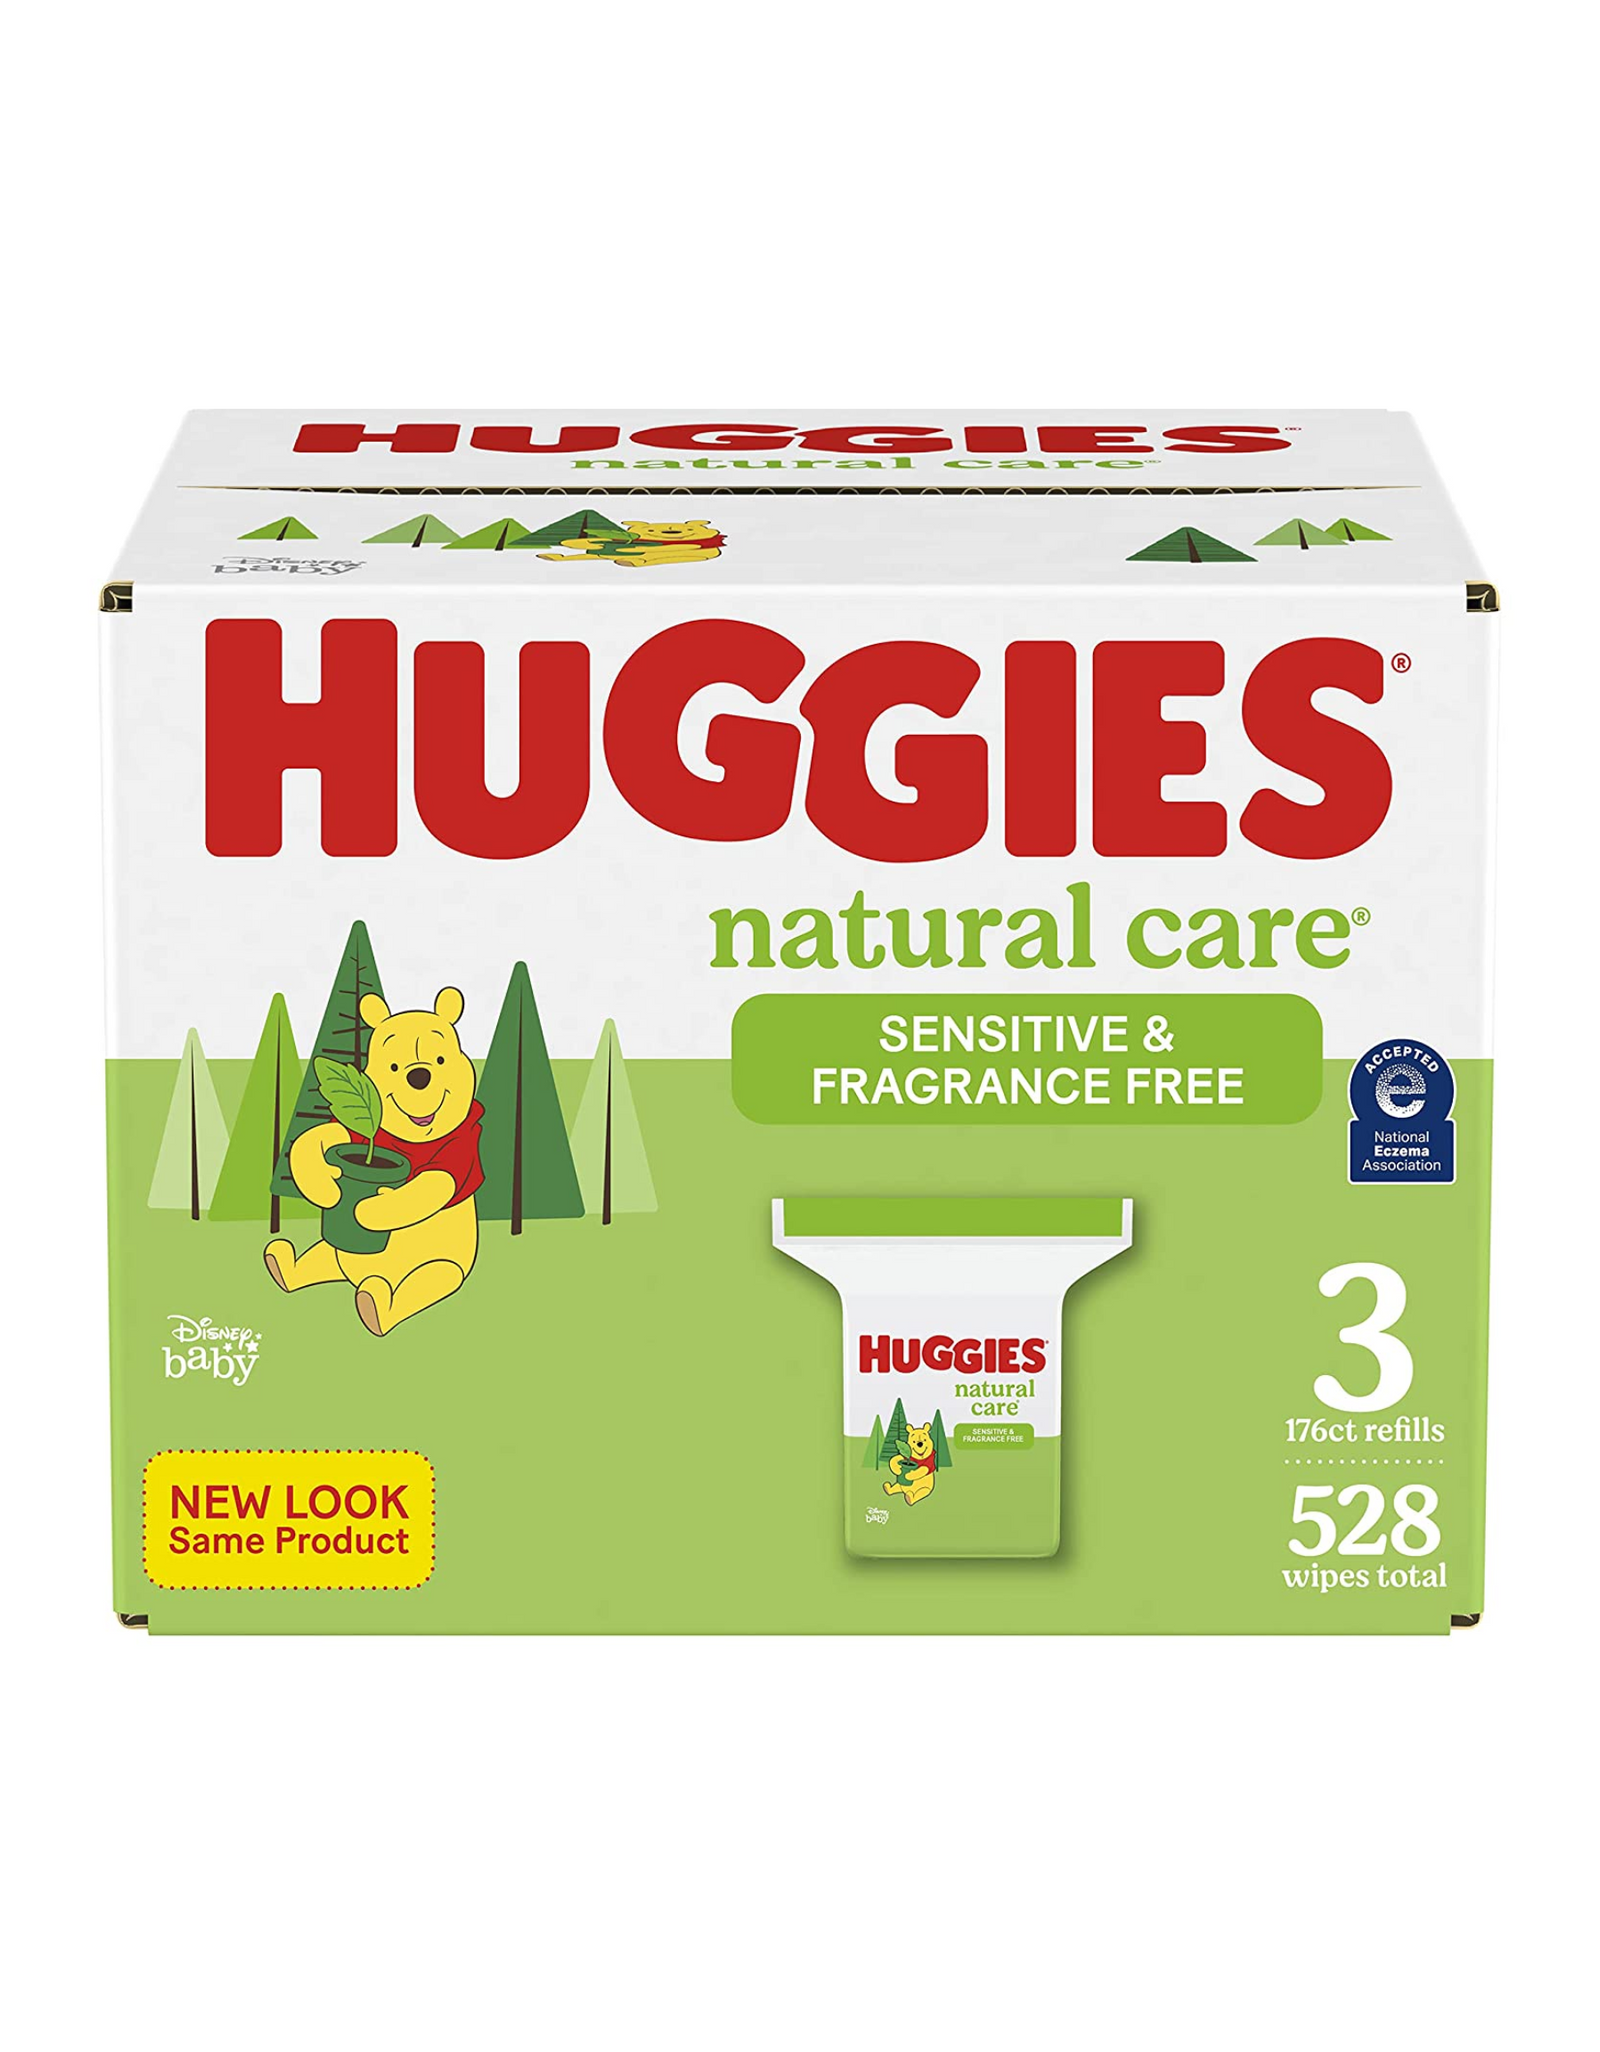 Baby Wipes, Huggies Natural Care Sensitive & Fragrance Free, 528 Wipes Total (3 Refill Packs)